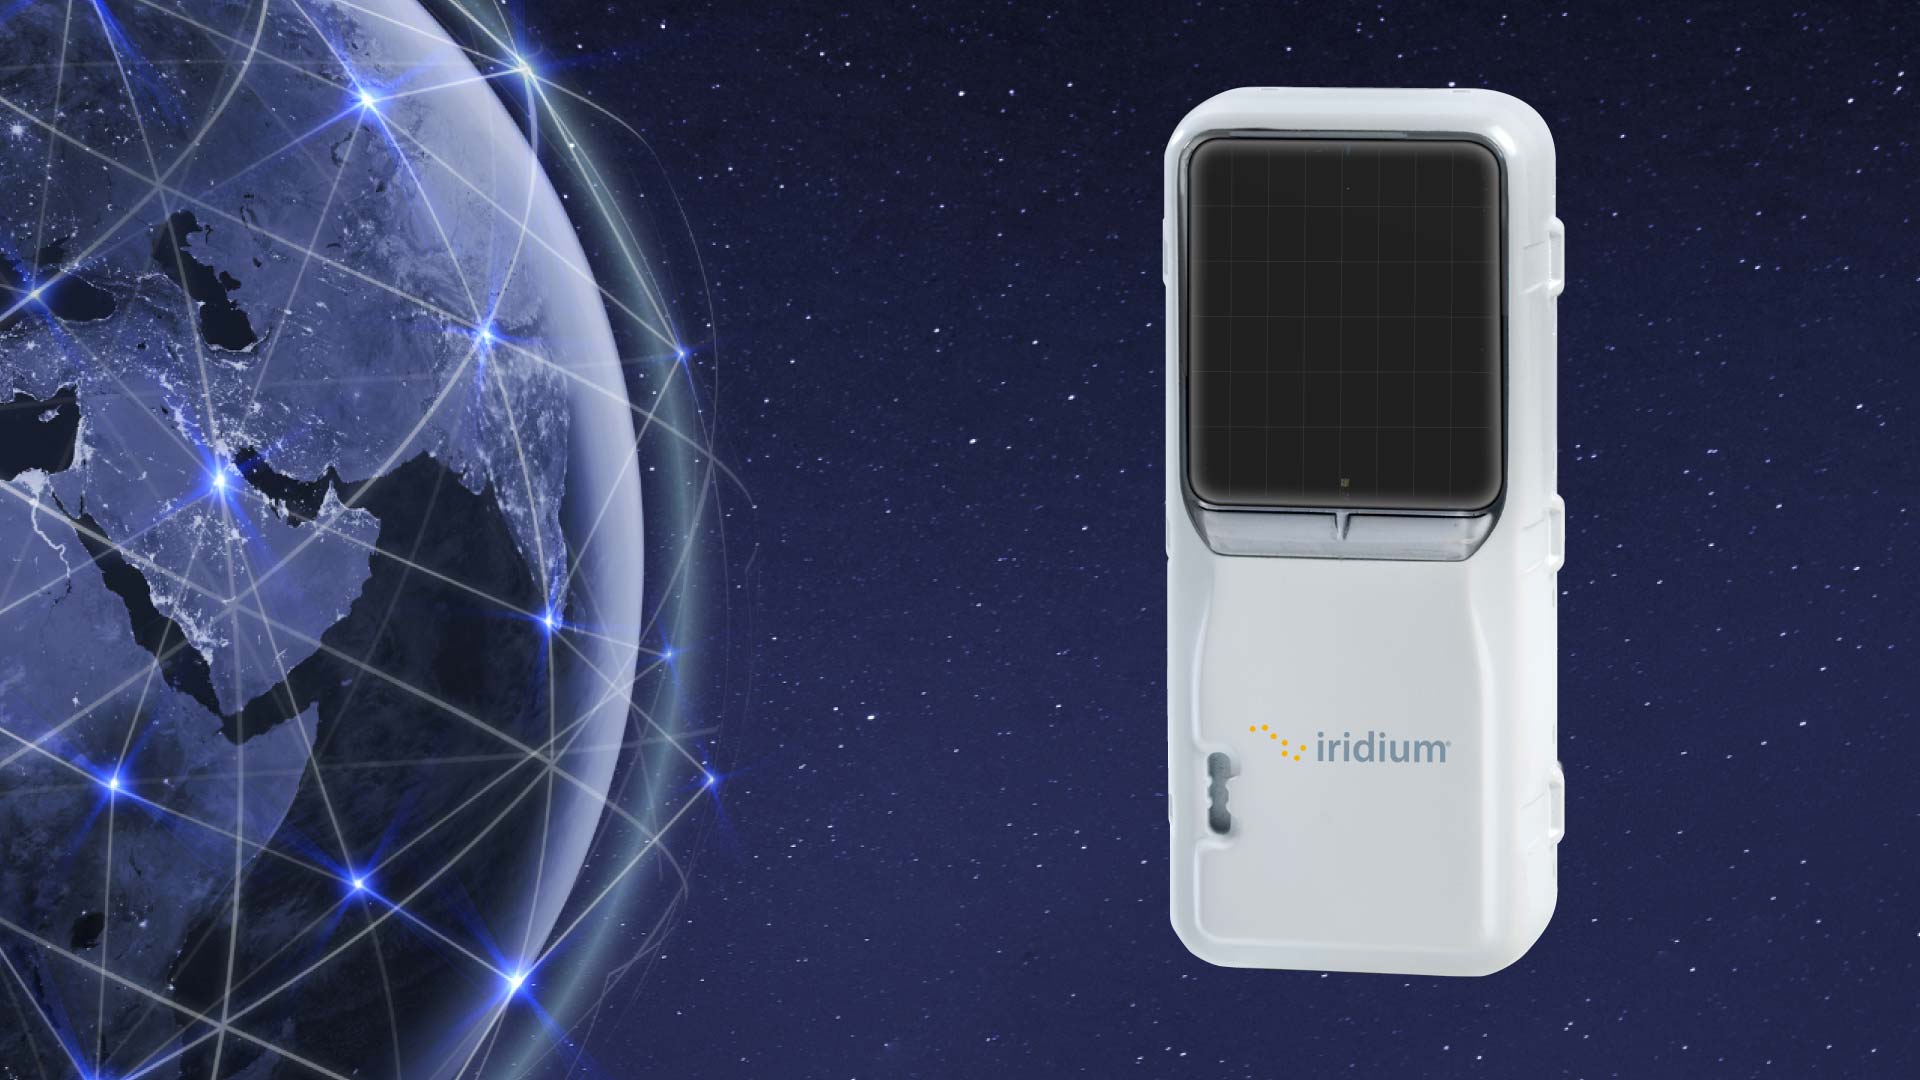 The Iridium Edge Solar is fully encapsulated, water ingress-protected design ensures durability even in the harshest environments, while the inclusion of accelerometer and magnetometer sensors enhances its tracking capabilities.